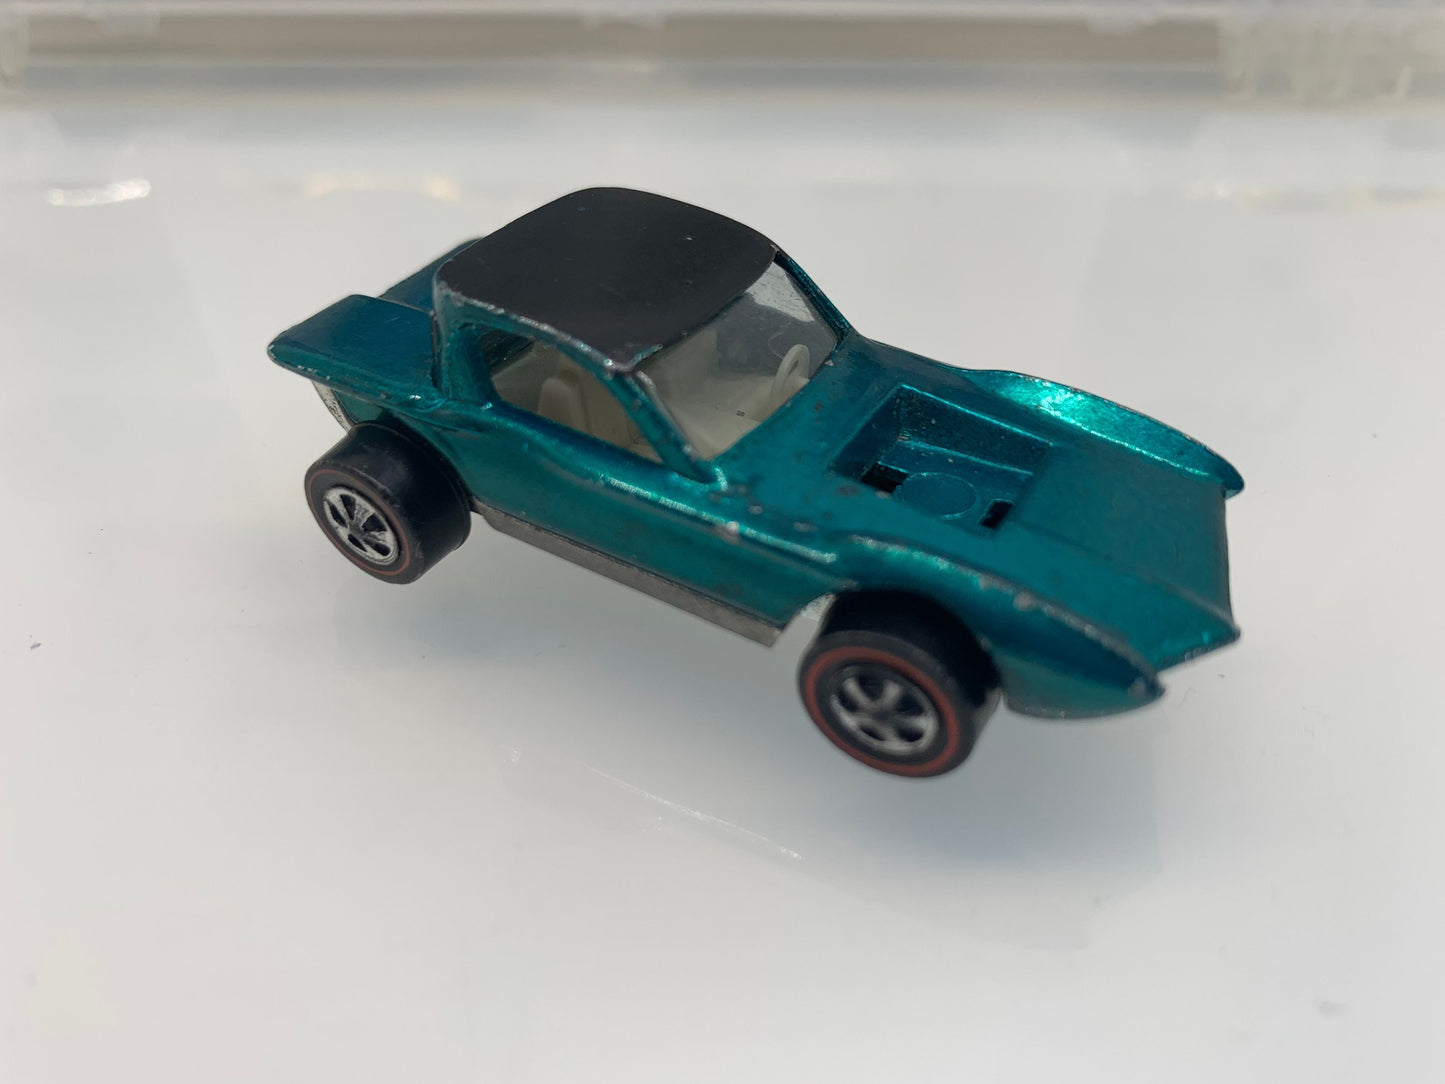 Hot Wheels Redline Python Green - Vintage Diecast Metal Cars - Vintage Collectibles - 1960's Toy Cars - Perfect Birthday Gift